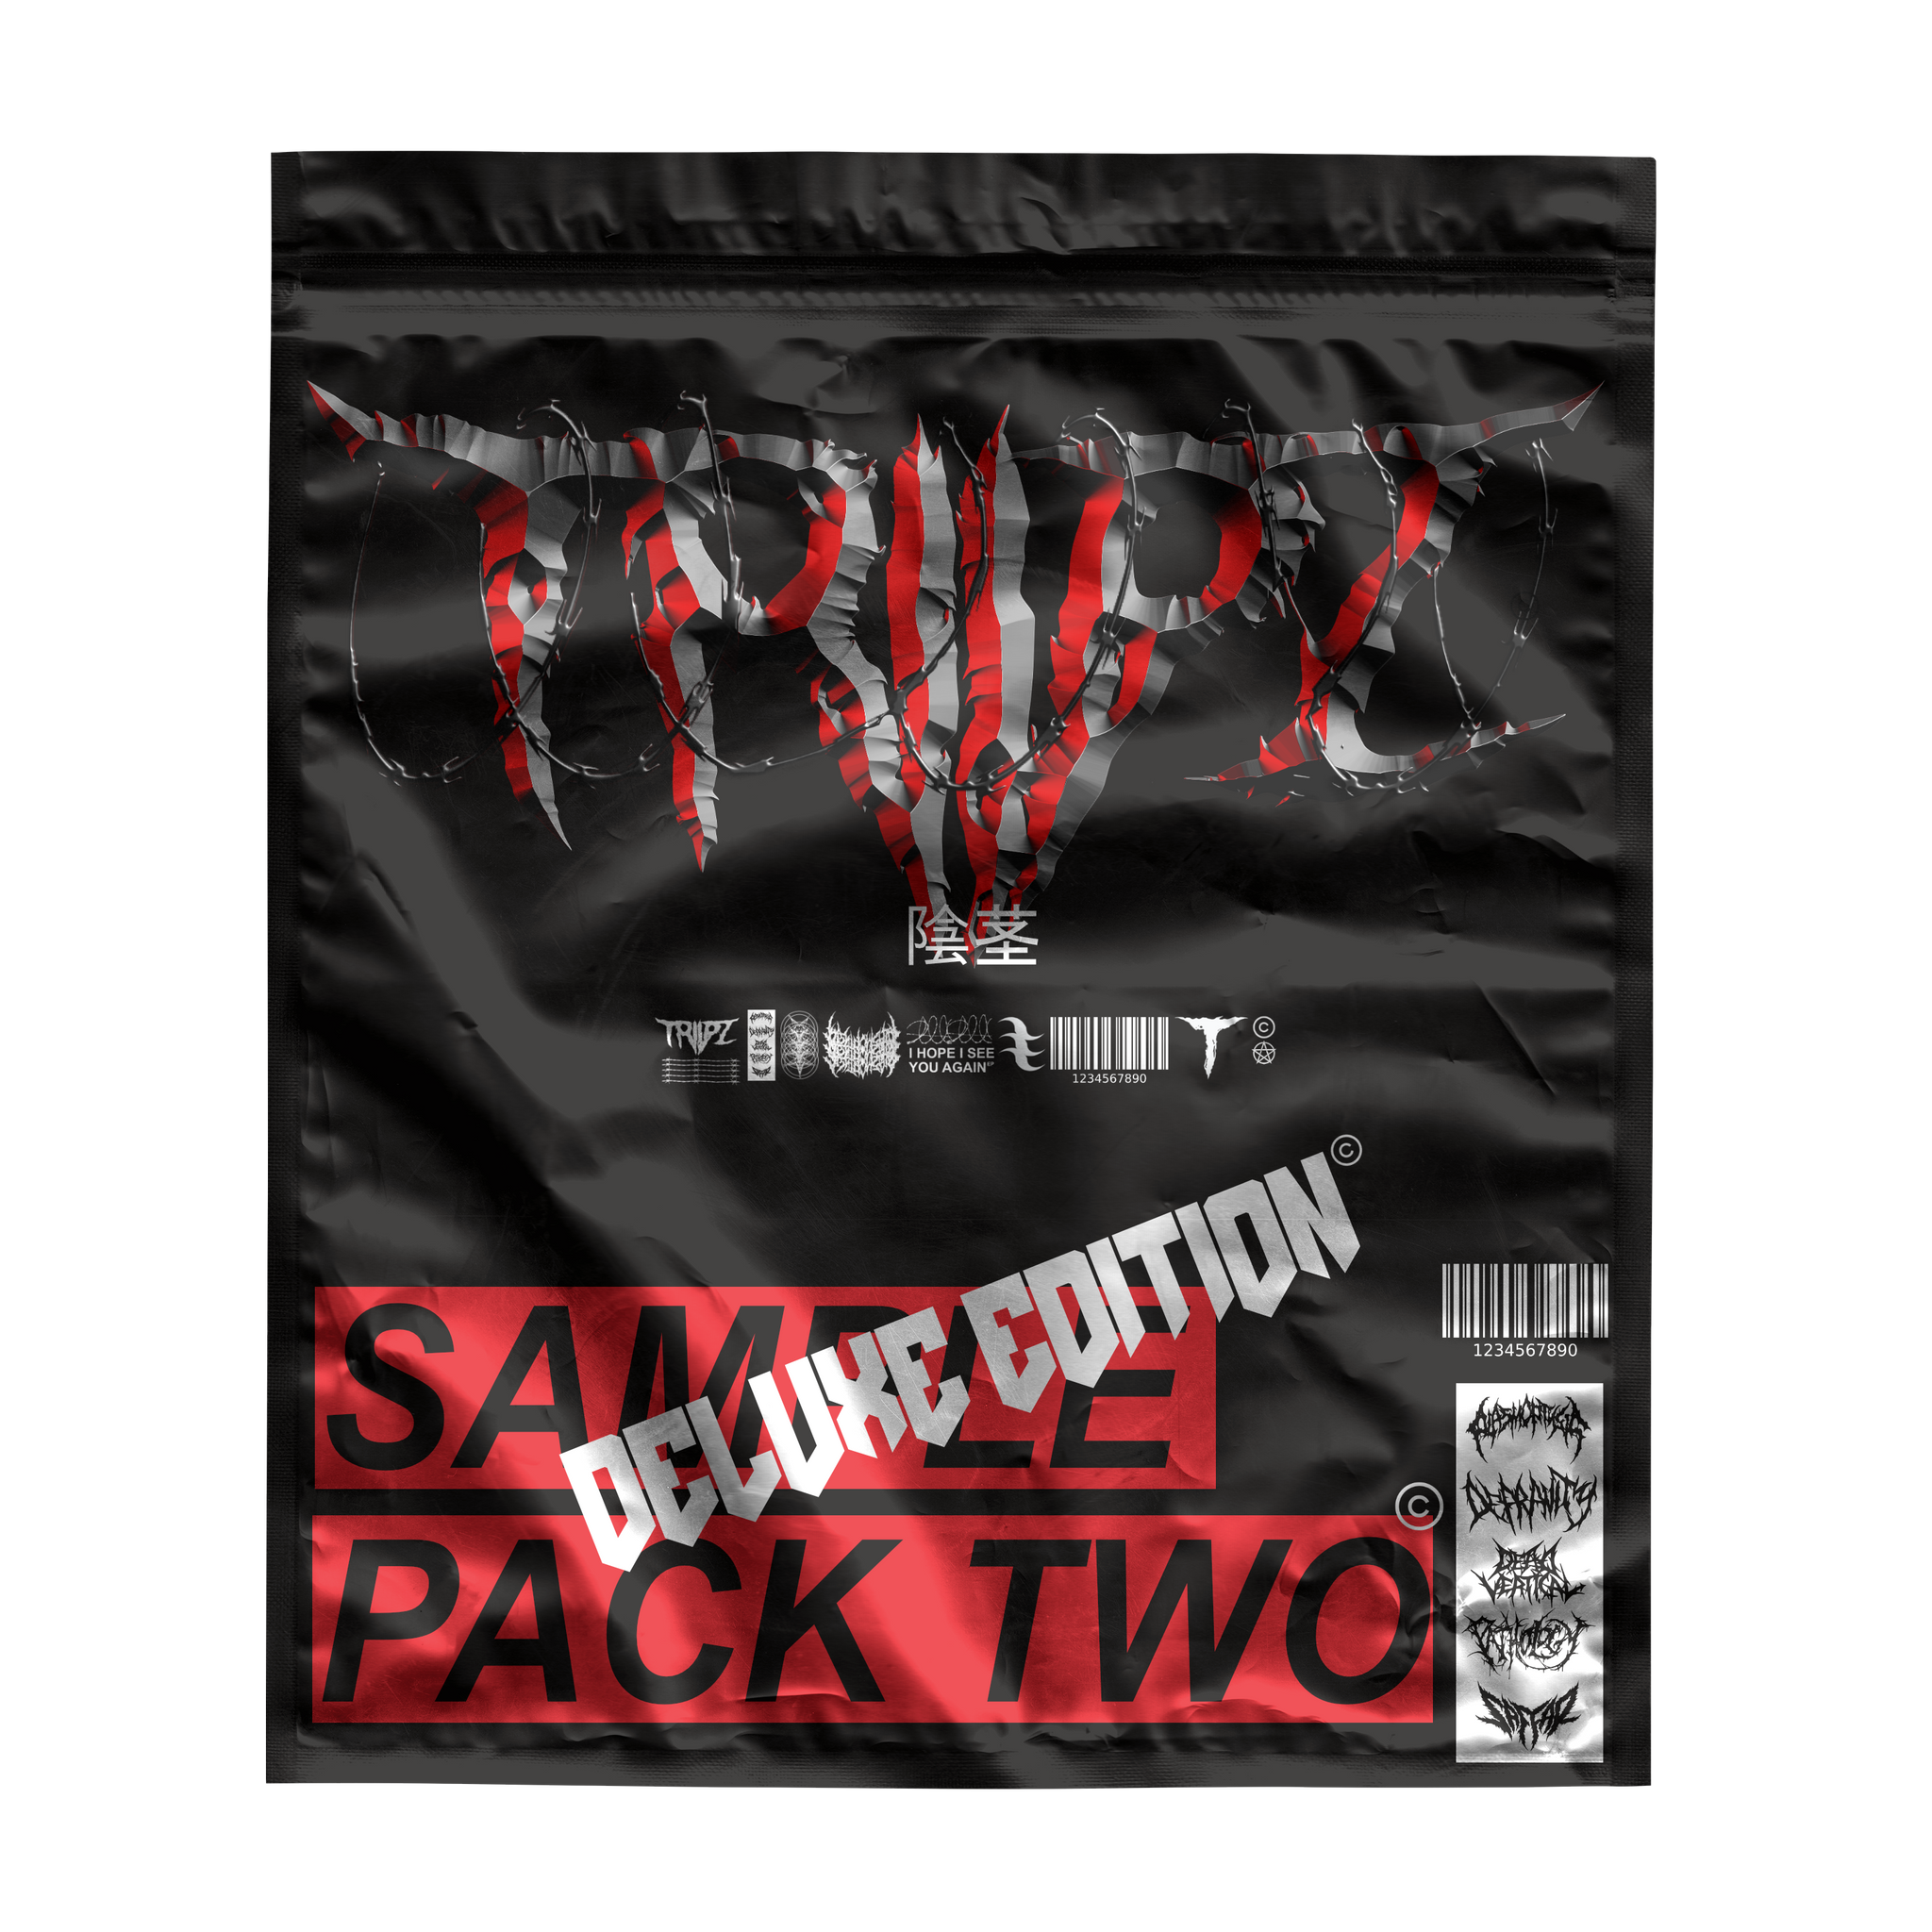 triipz sample pack two deluxe edition